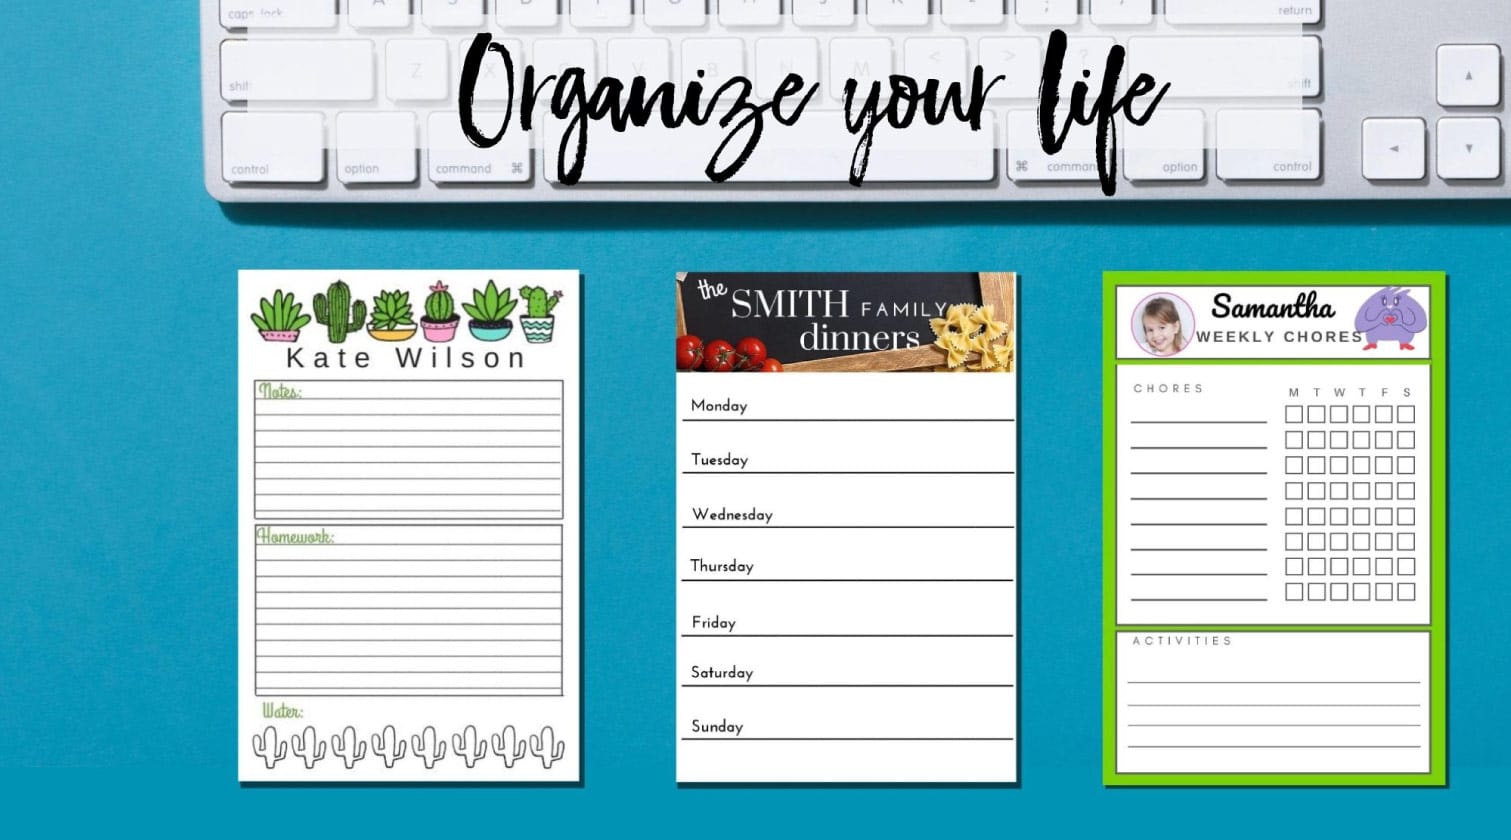 to do lists can be customized to keep organized | resize free printables to fit 4"x6"